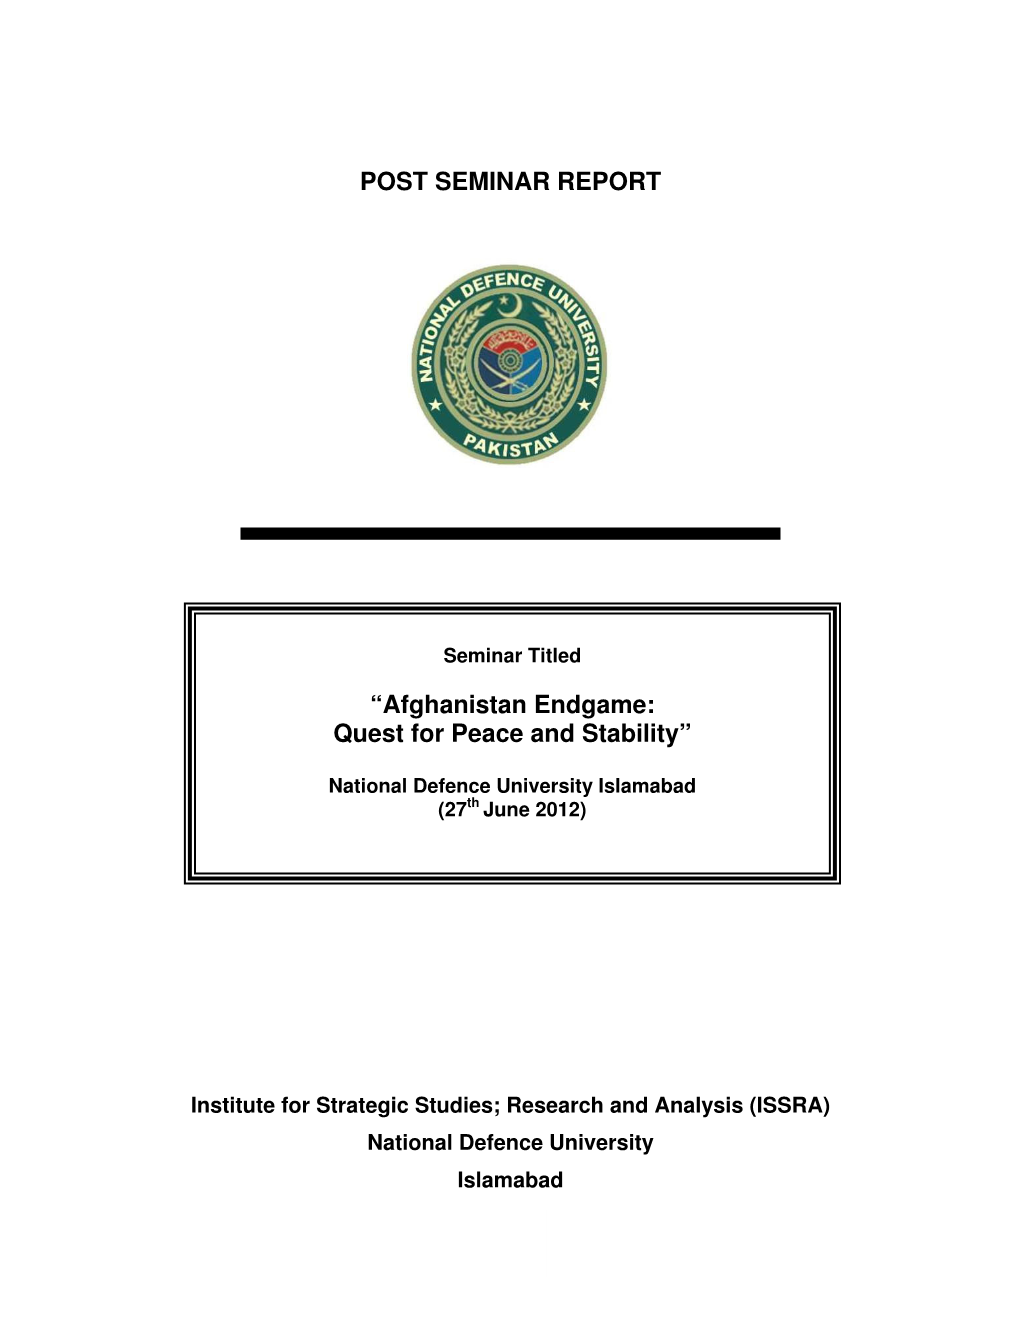 POST SEMINAR REPORT “Afghanistan Endgame: Quest For